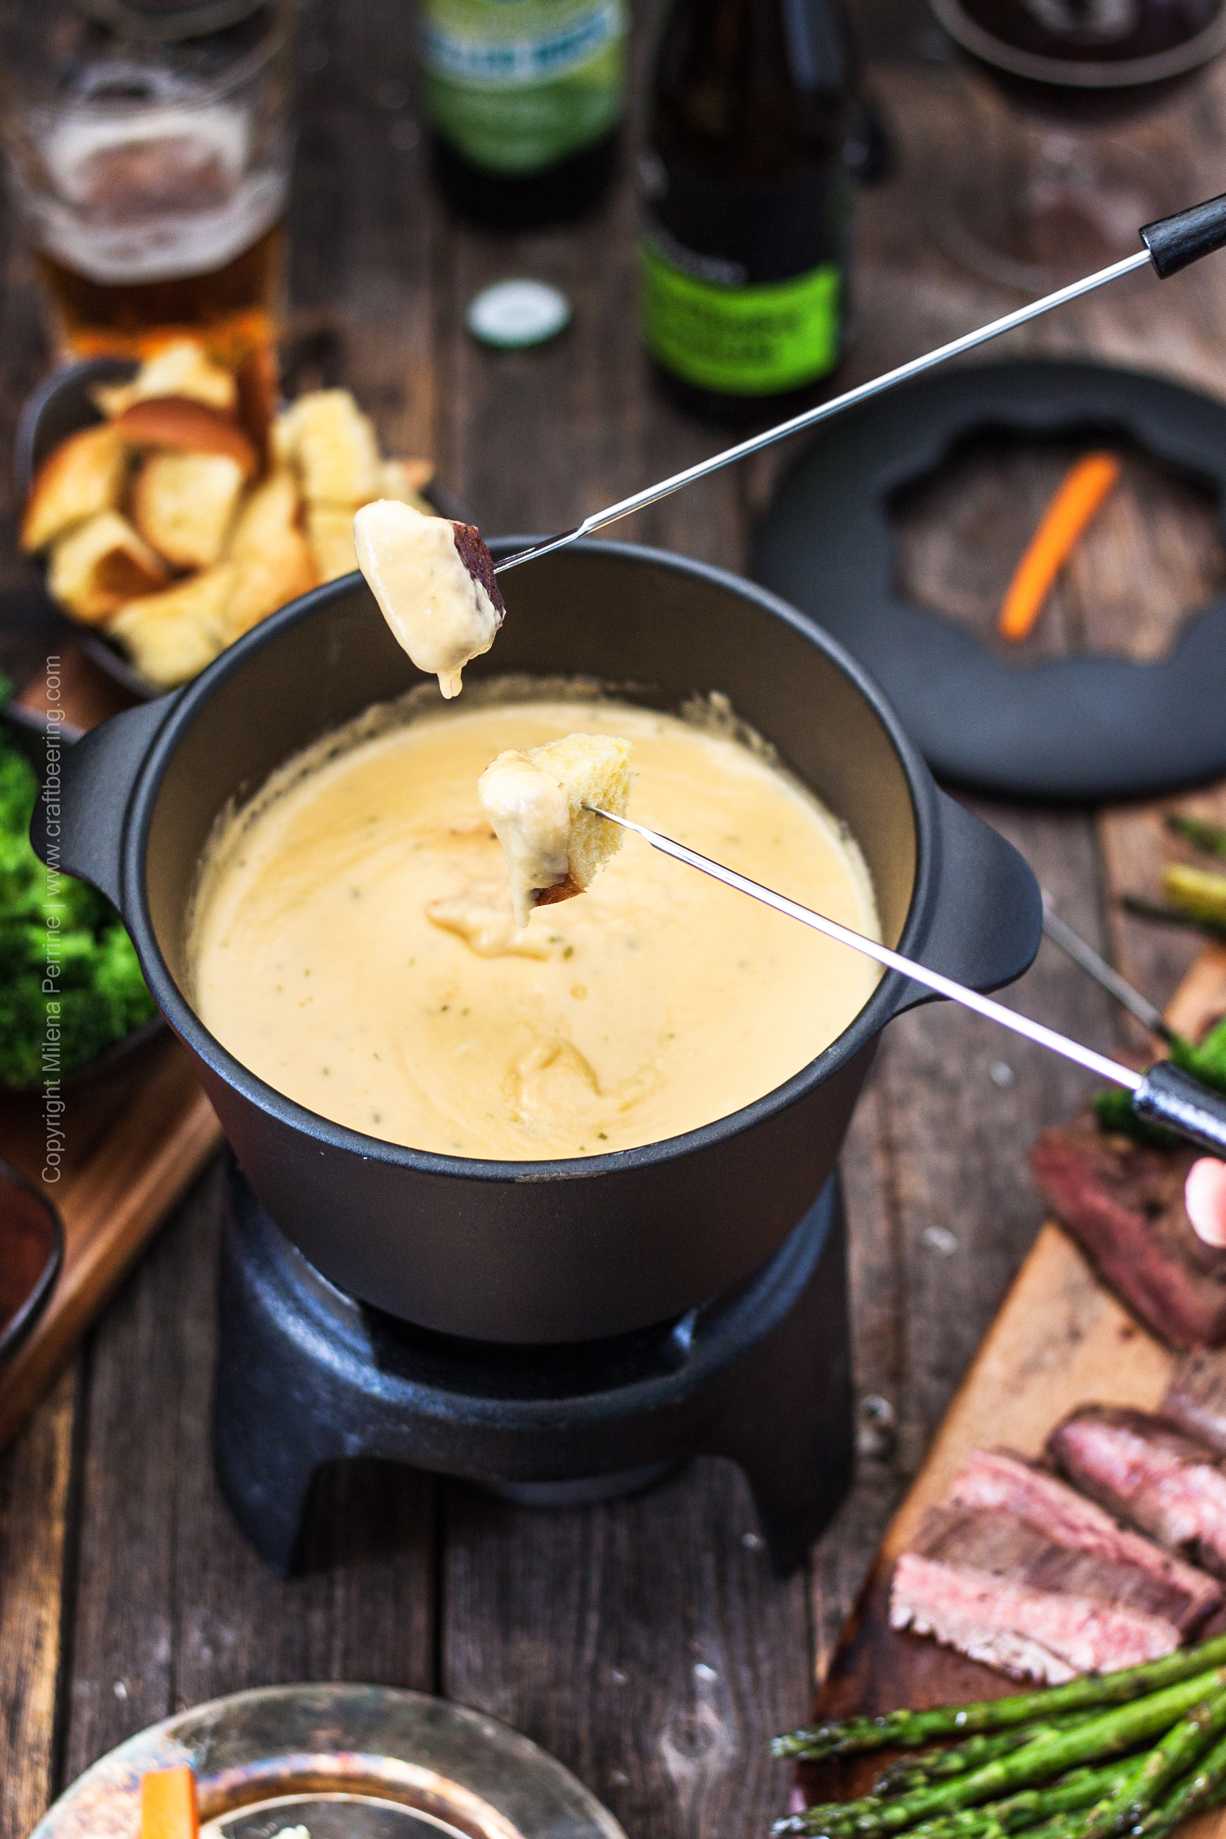 Beer cheese fondue - the perfect dipping sauce for beer lovers.